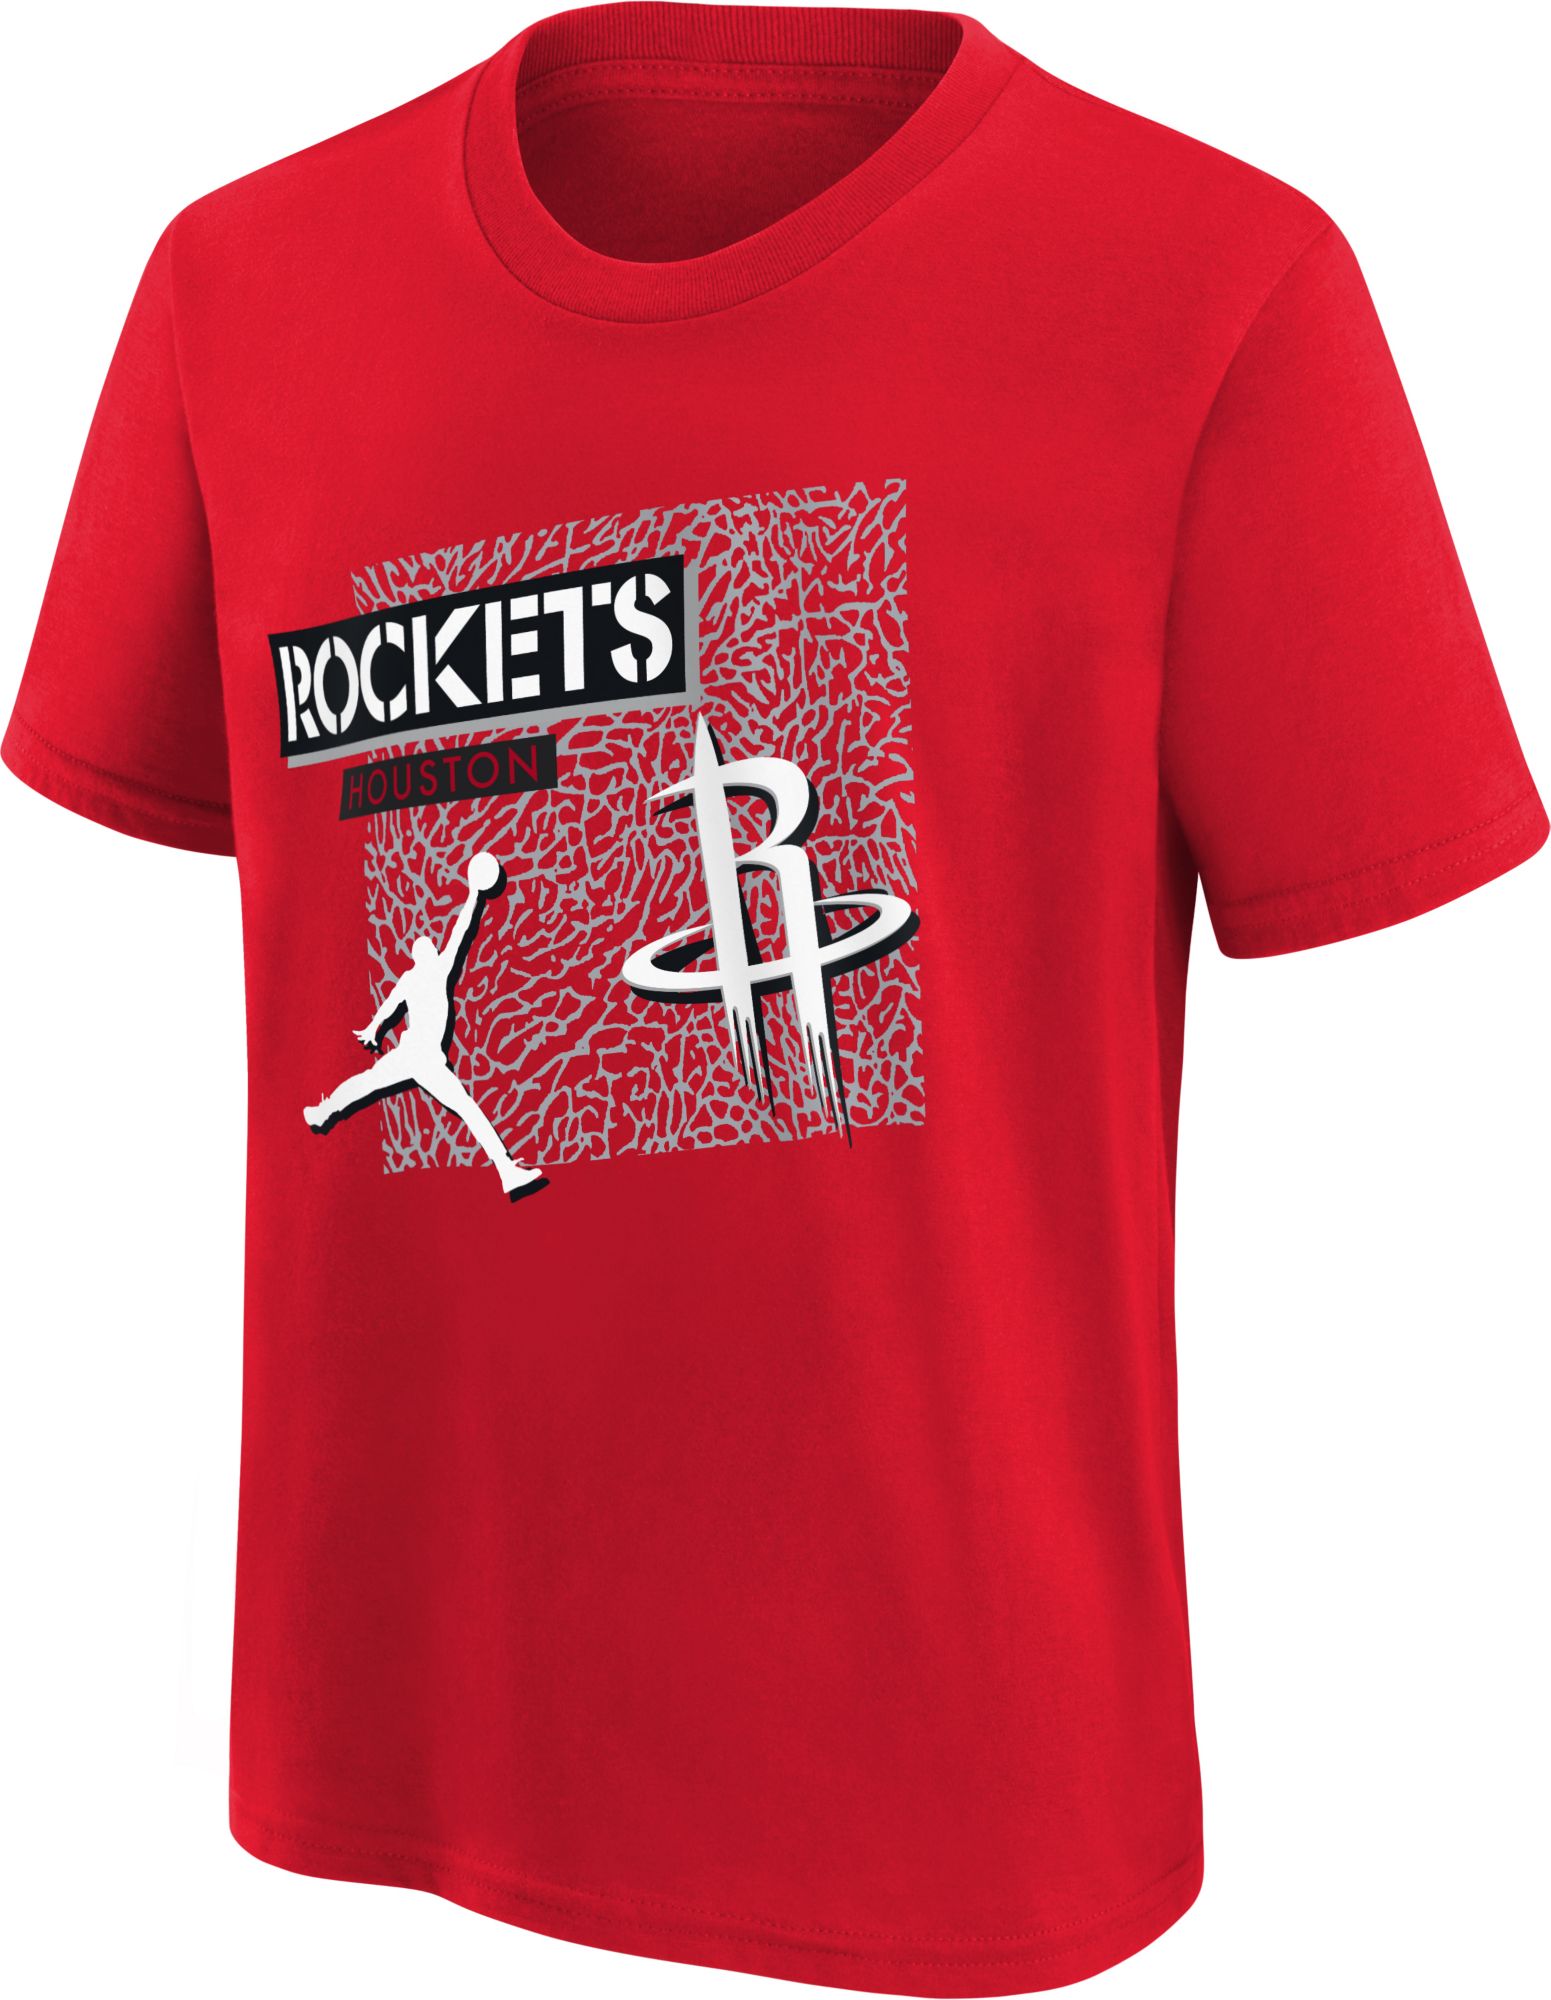 Houston Rockets Apparel & Gear Curbside Pickup Available at DICK'S